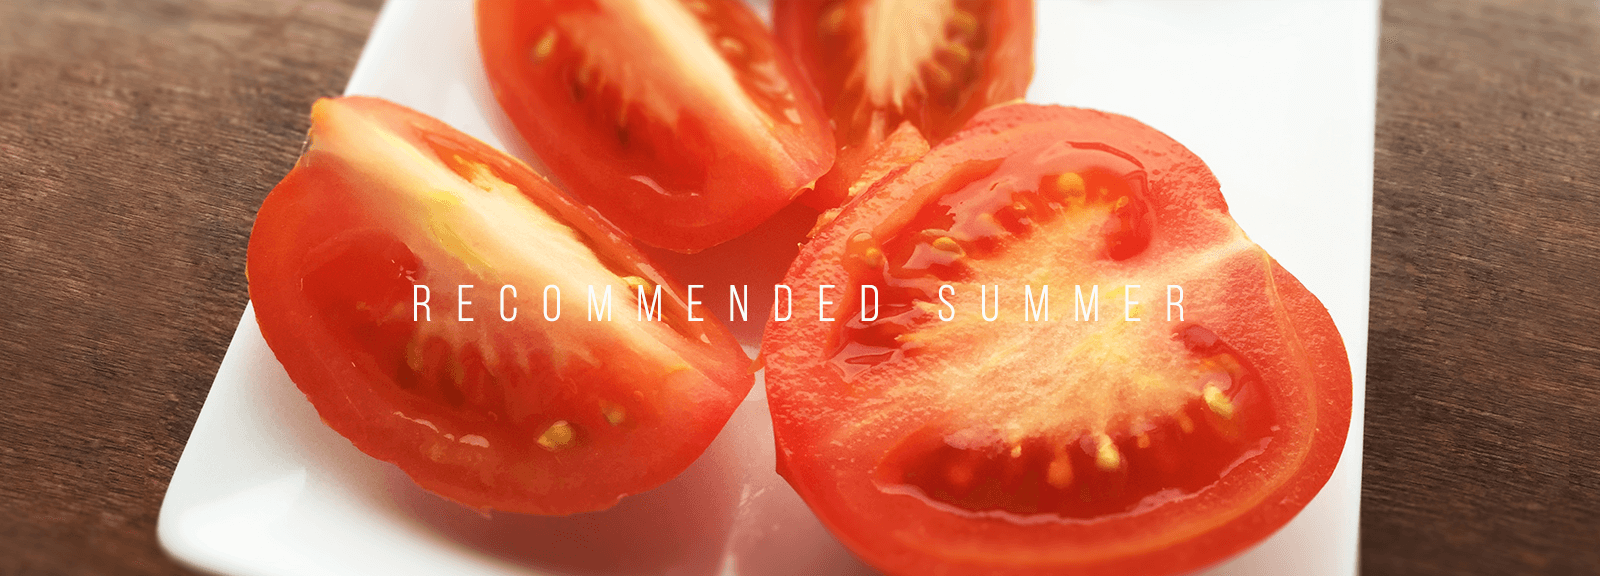 RECOMMENDED SUMMER